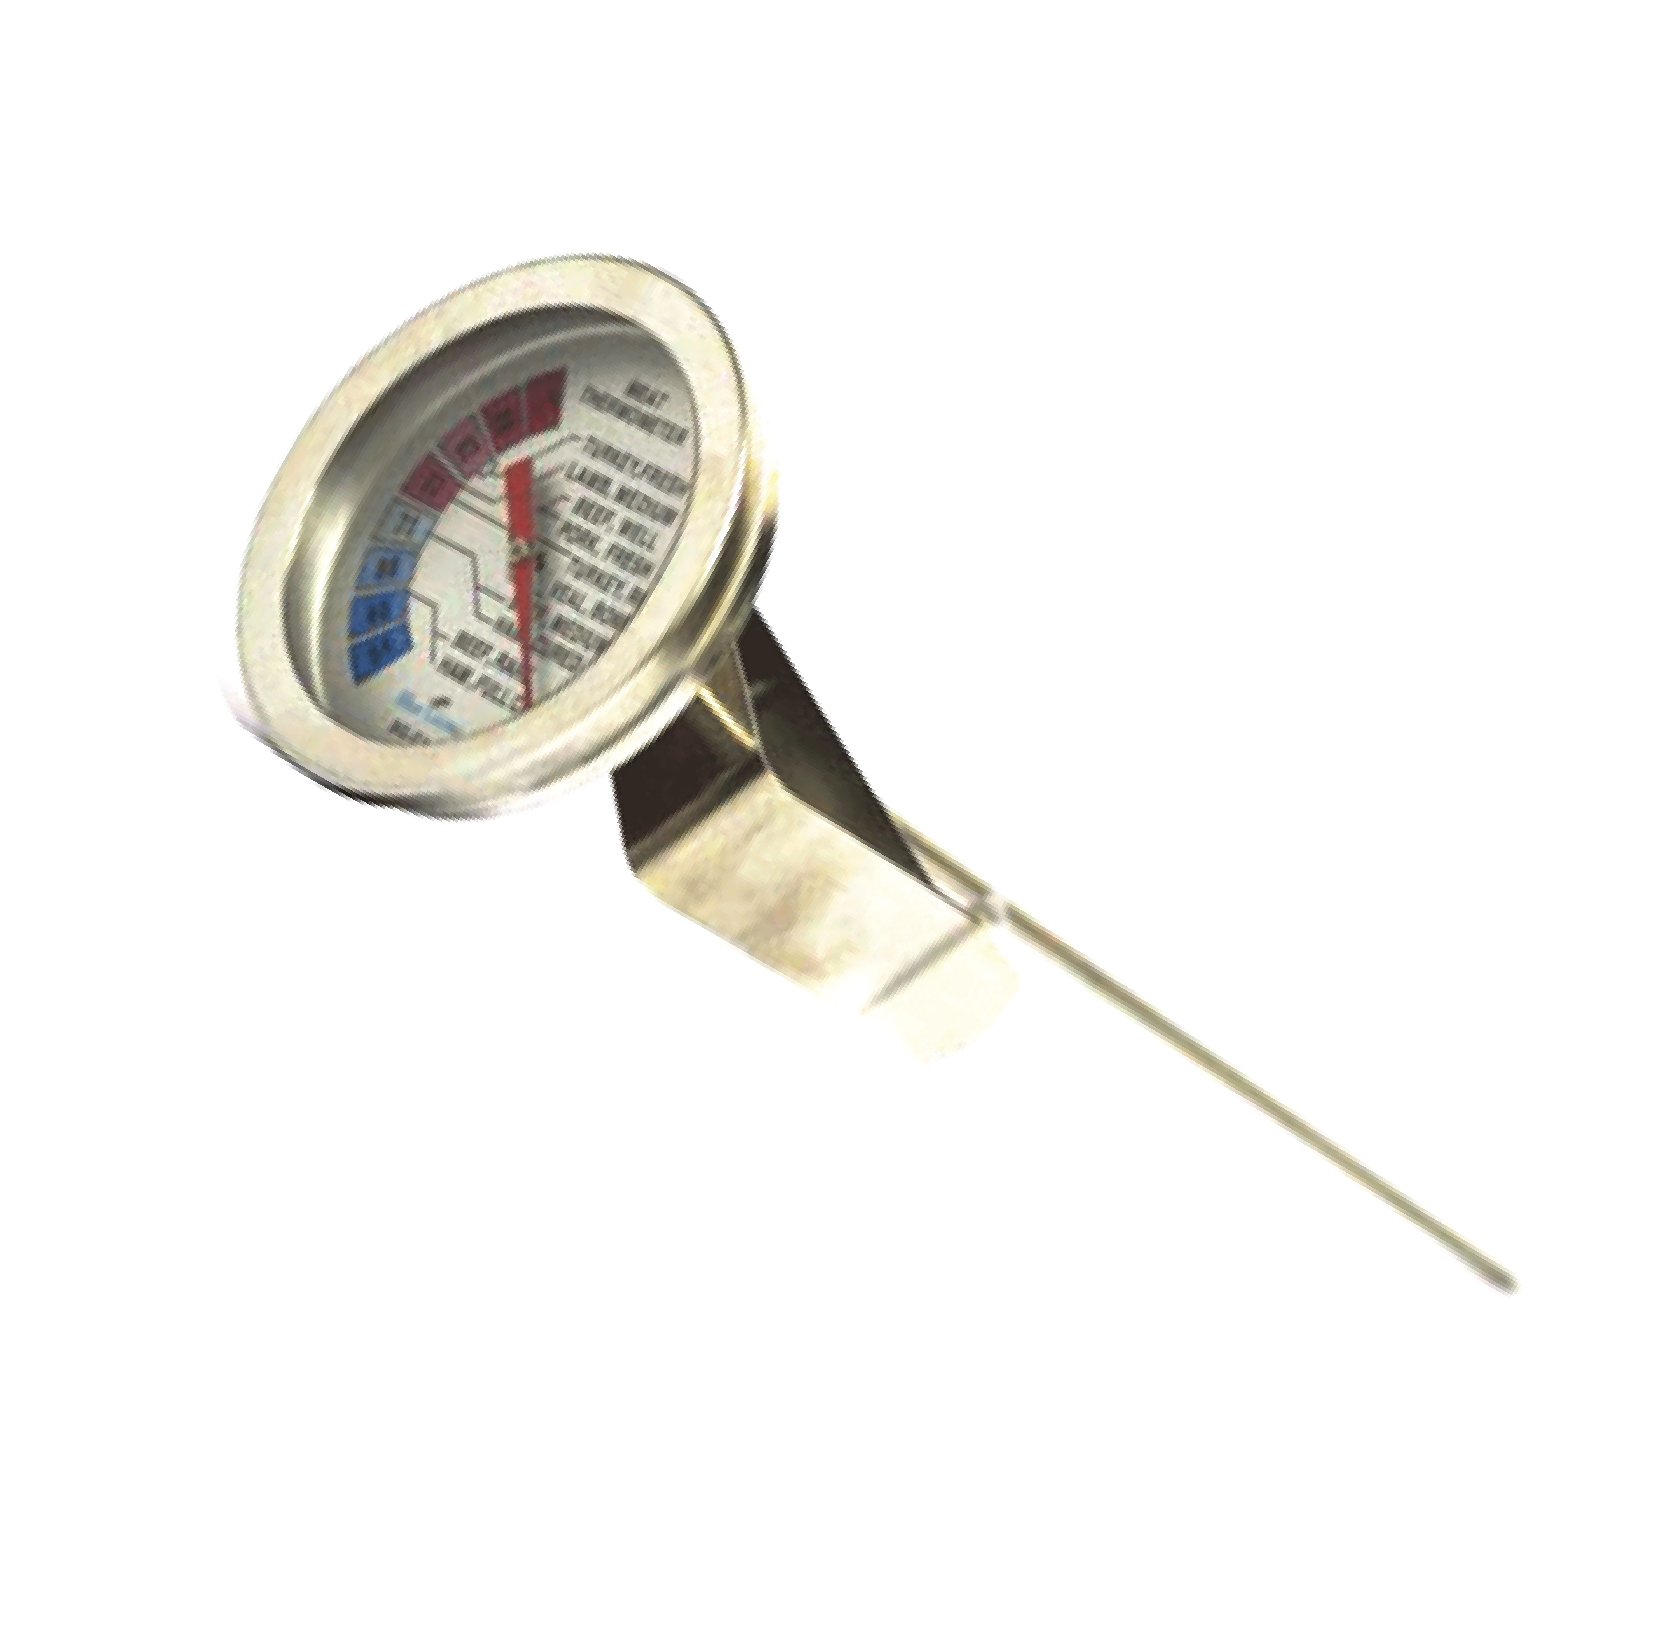 BLUE GIZMO MEAT THERMOMETER